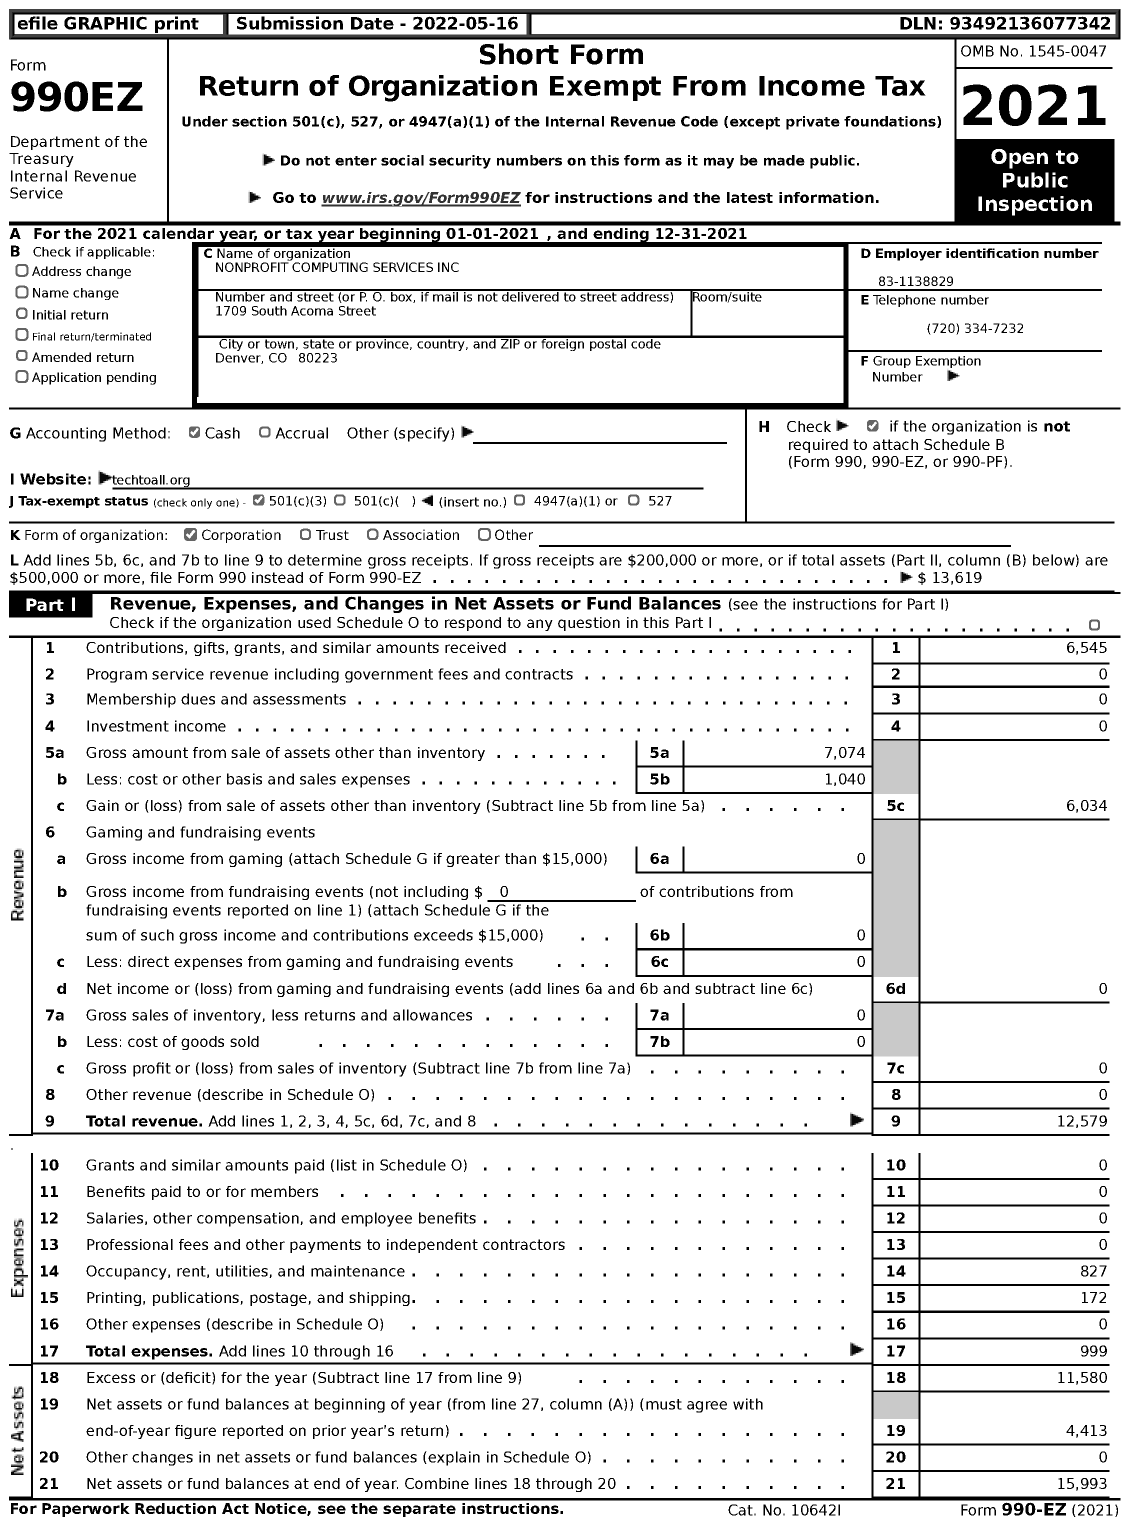 Image of first page of 2021 Form 990EZ for Nonprofit Computing Services